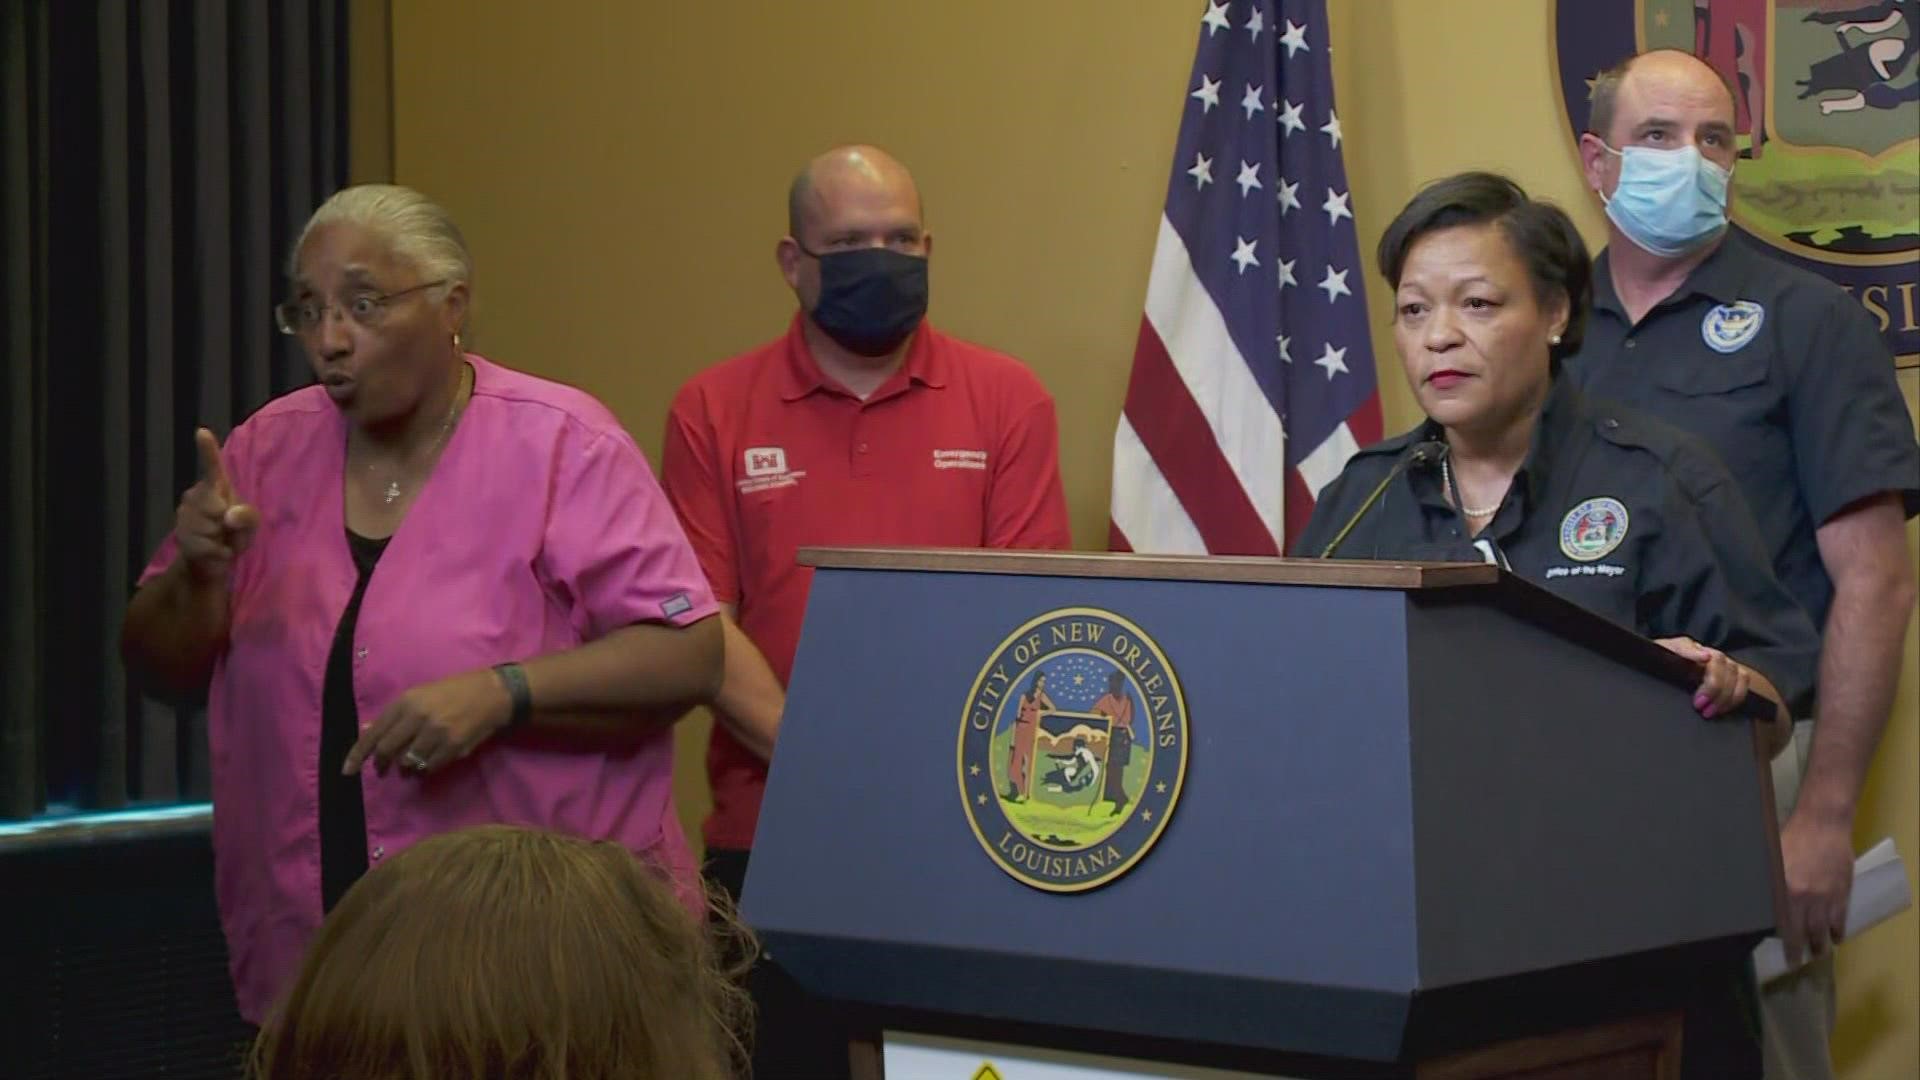 New Orleans Mayor LaToya Cantrell is calling for residents to either evacuate voluntarily or shelter in place by Saturday night.